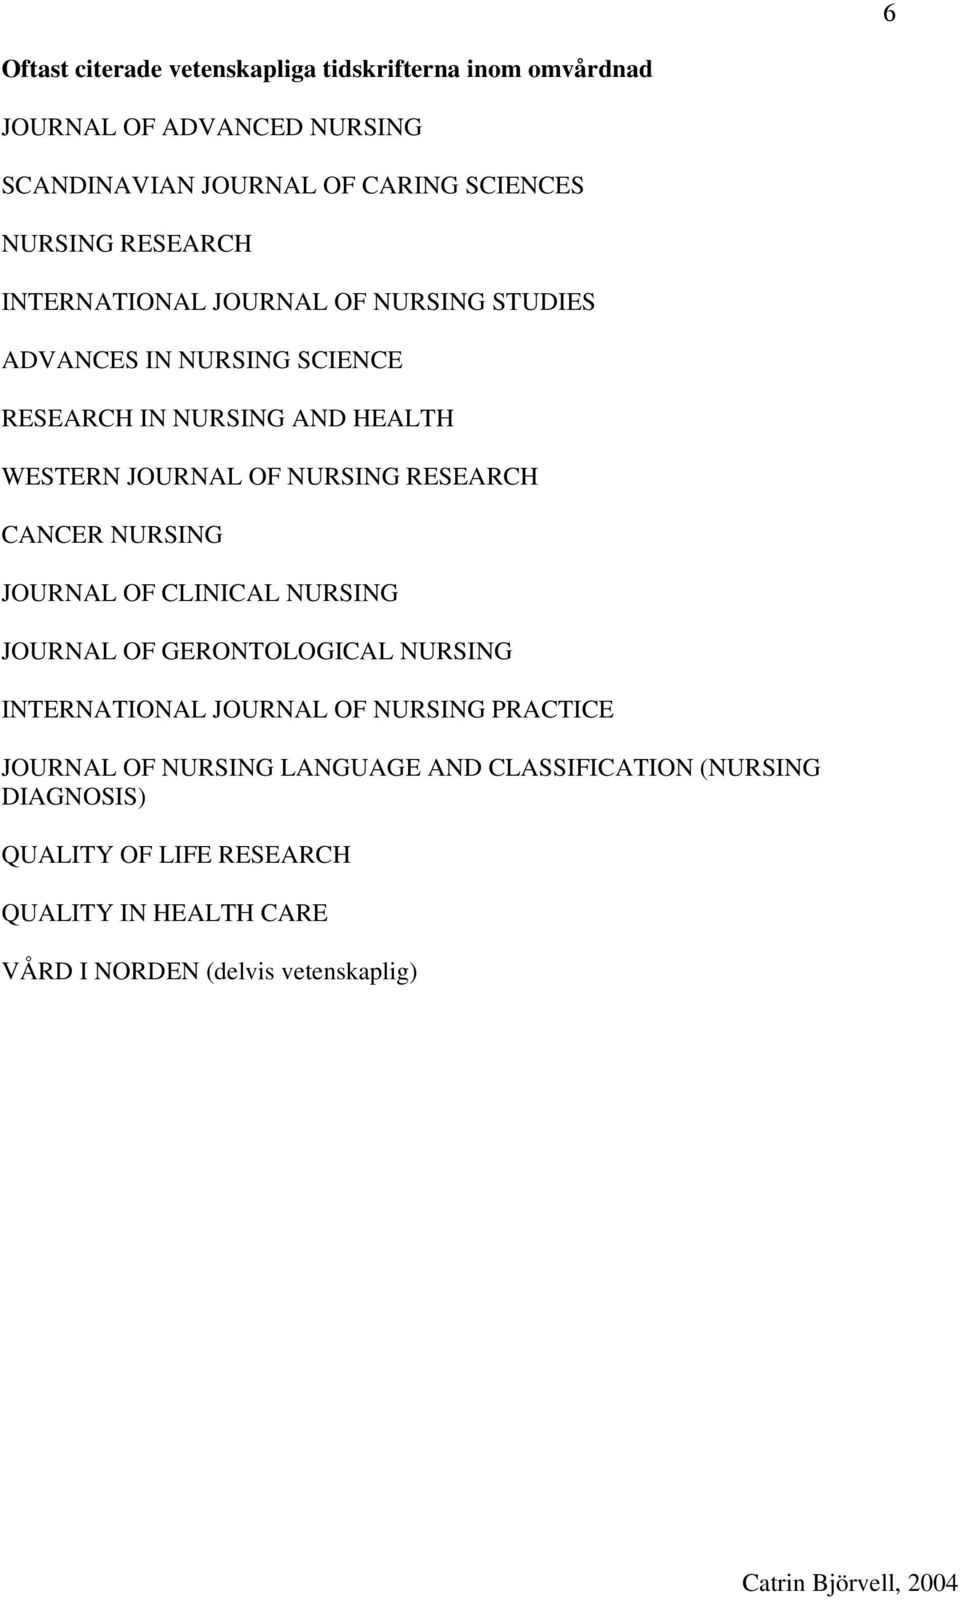 RESEARCH CANCER NURSING JOURNAL OF CLINICAL NURSING JOURNAL OF GERONTOLOGICAL NURSING INTERNATIONAL JOURNAL OF NURSING PRACTICE JOURNAL